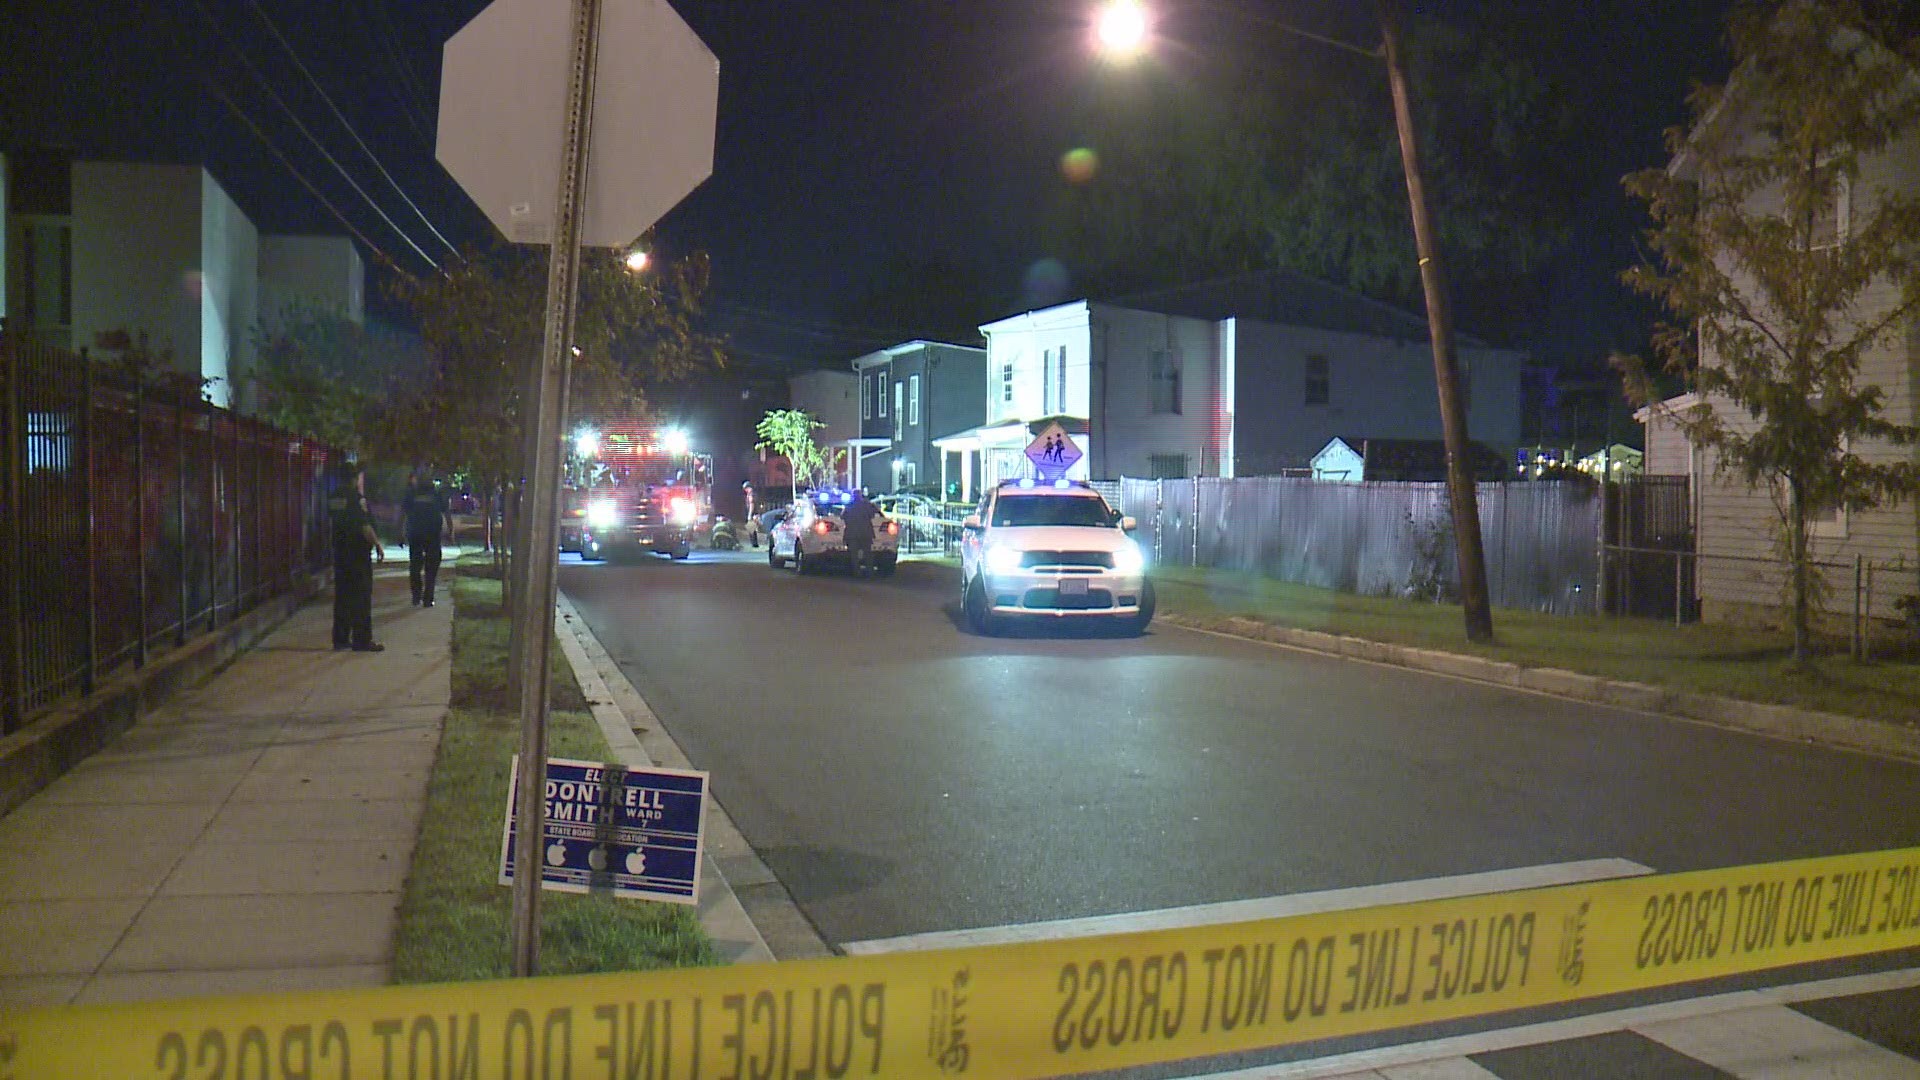 A 30-year-old man was shot and killed on the 1100 block of 45th Street in Northeast D.C. Tuesday evening. This incident marks the 150th homicide in the city.